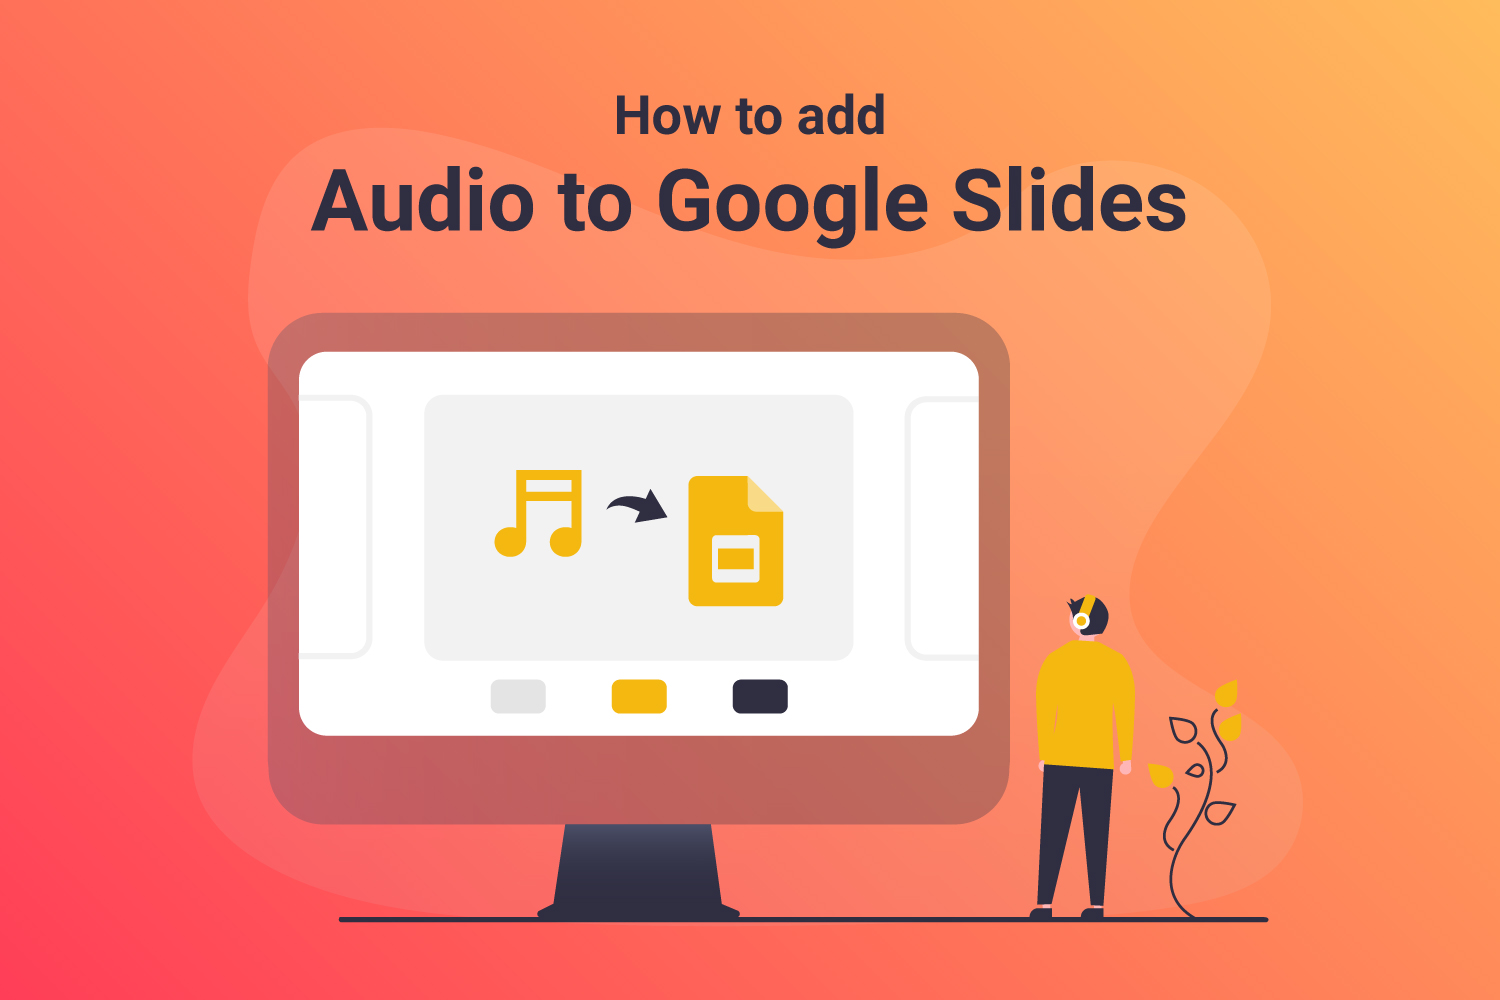 Image showing a system with music and Google slides icons